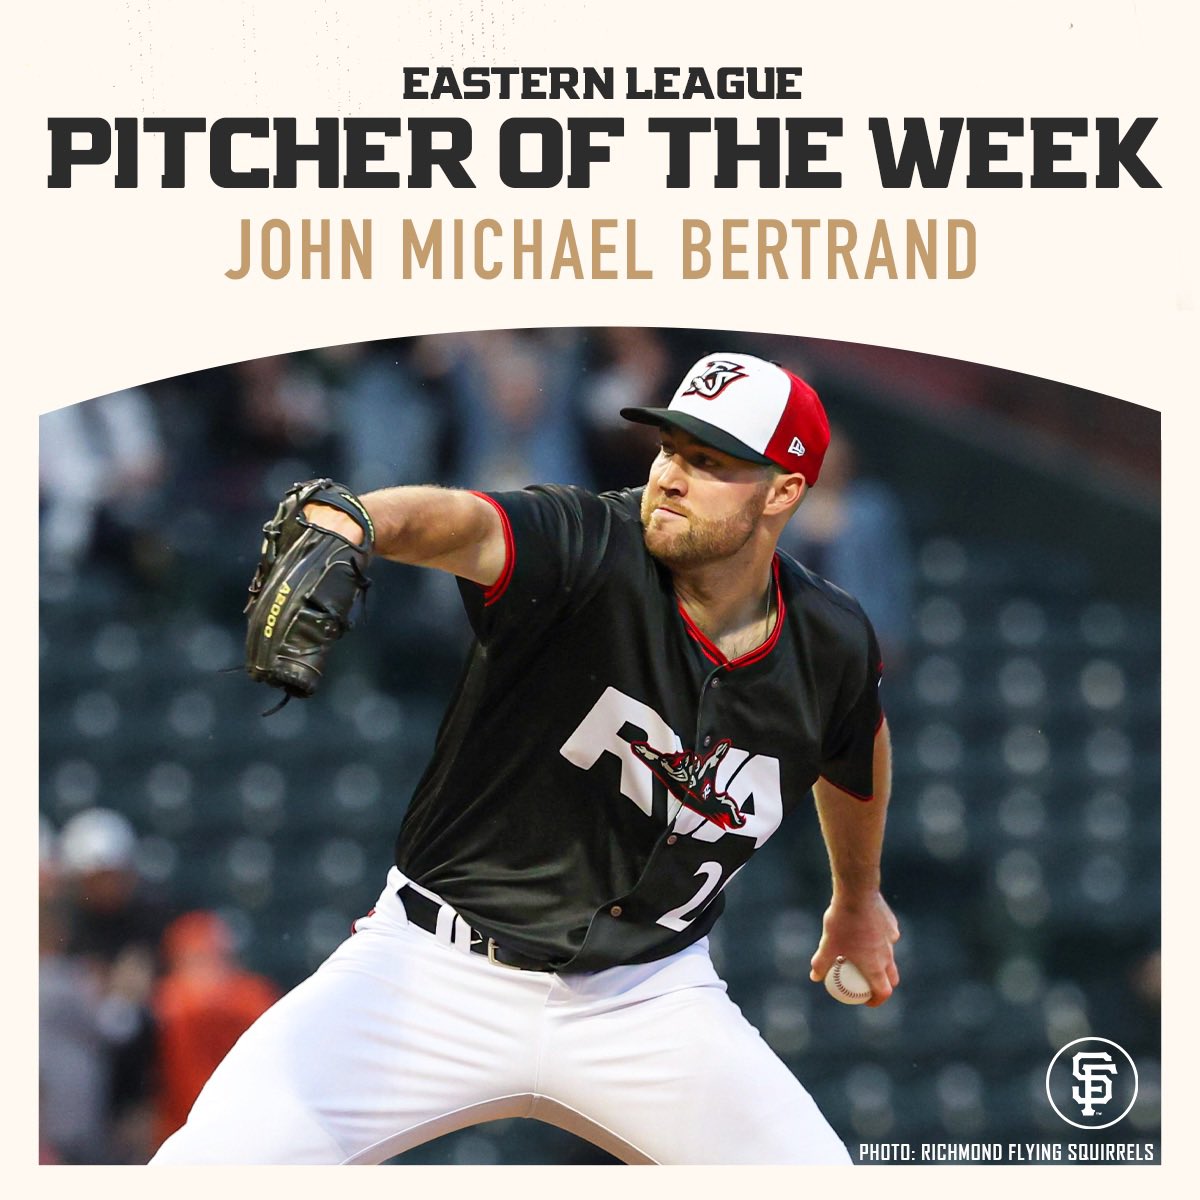 Congratulations to John Michael Bertrand on being named Eastern League Pitcher of the Week!